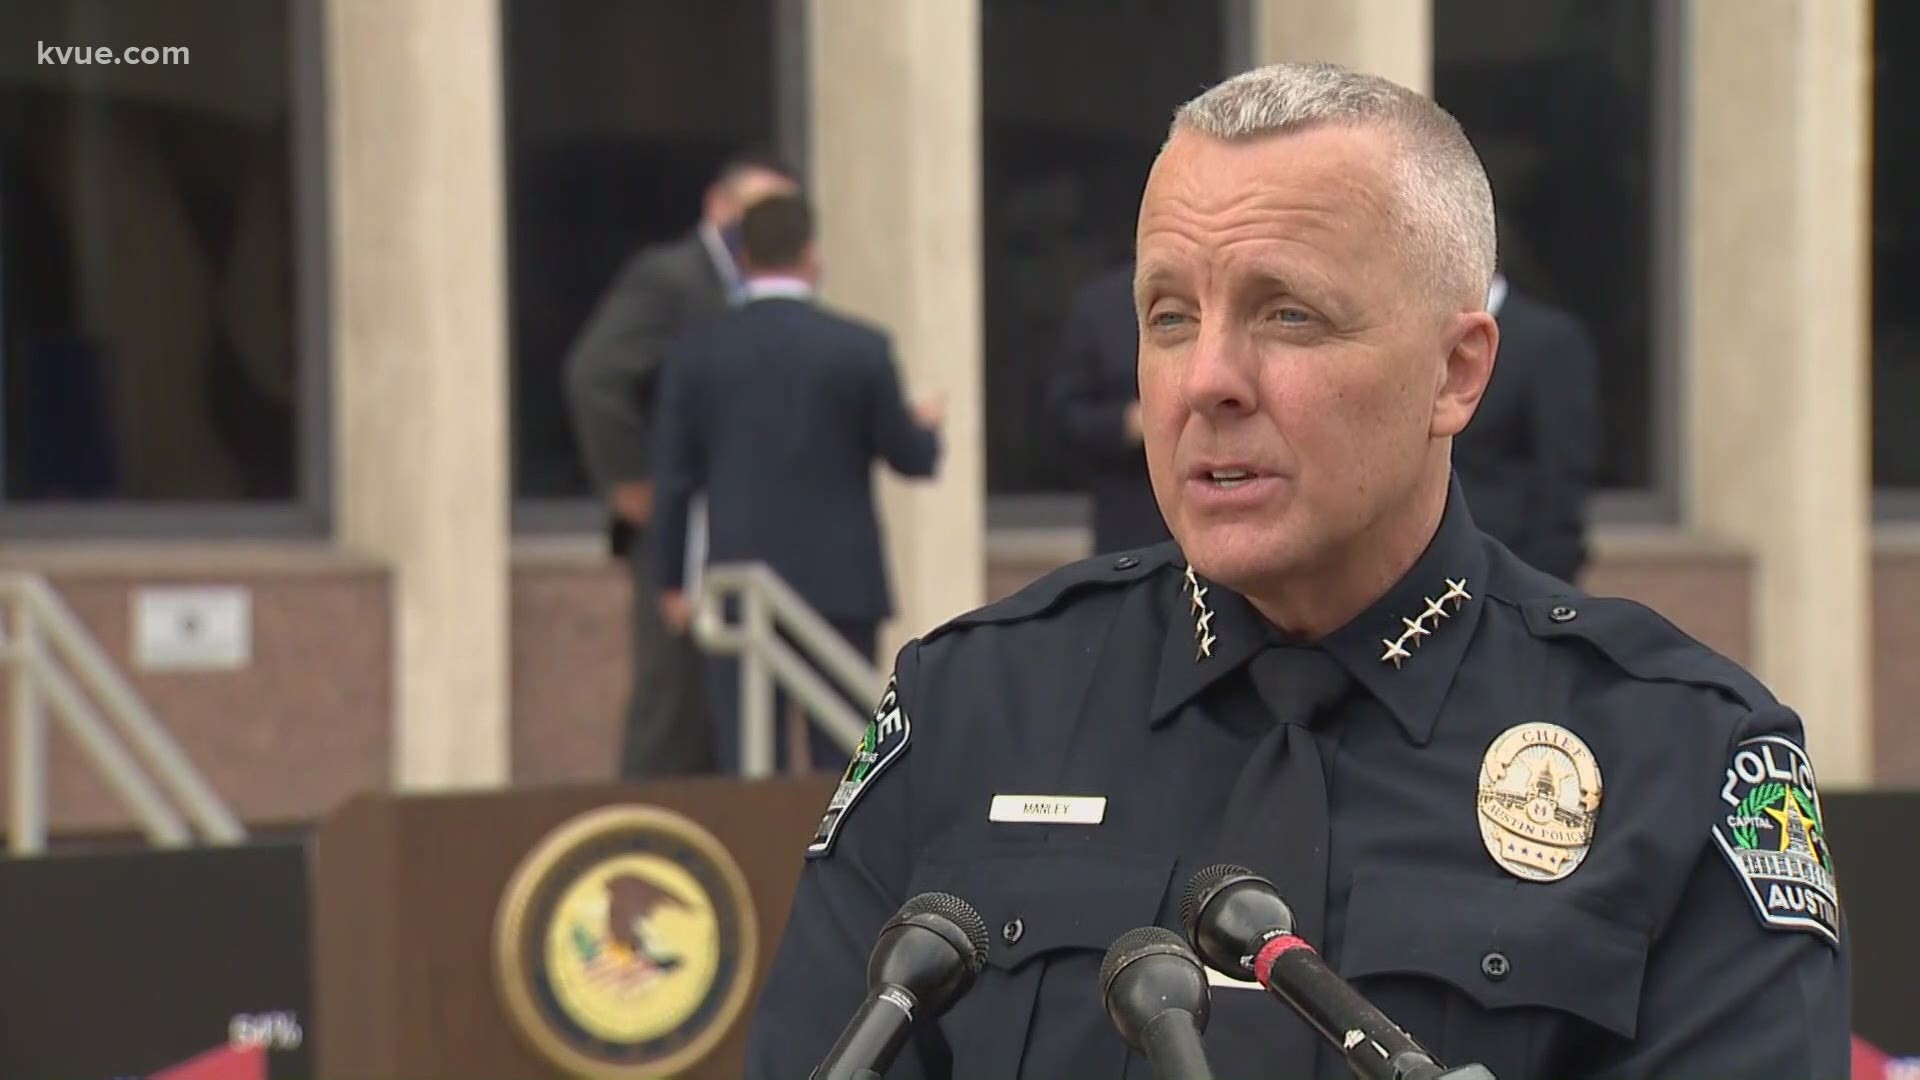 Operation Undaunted is a federal plan announced to tackle violent crime in Austin. Police say there have been more murders this year, compared to last year.